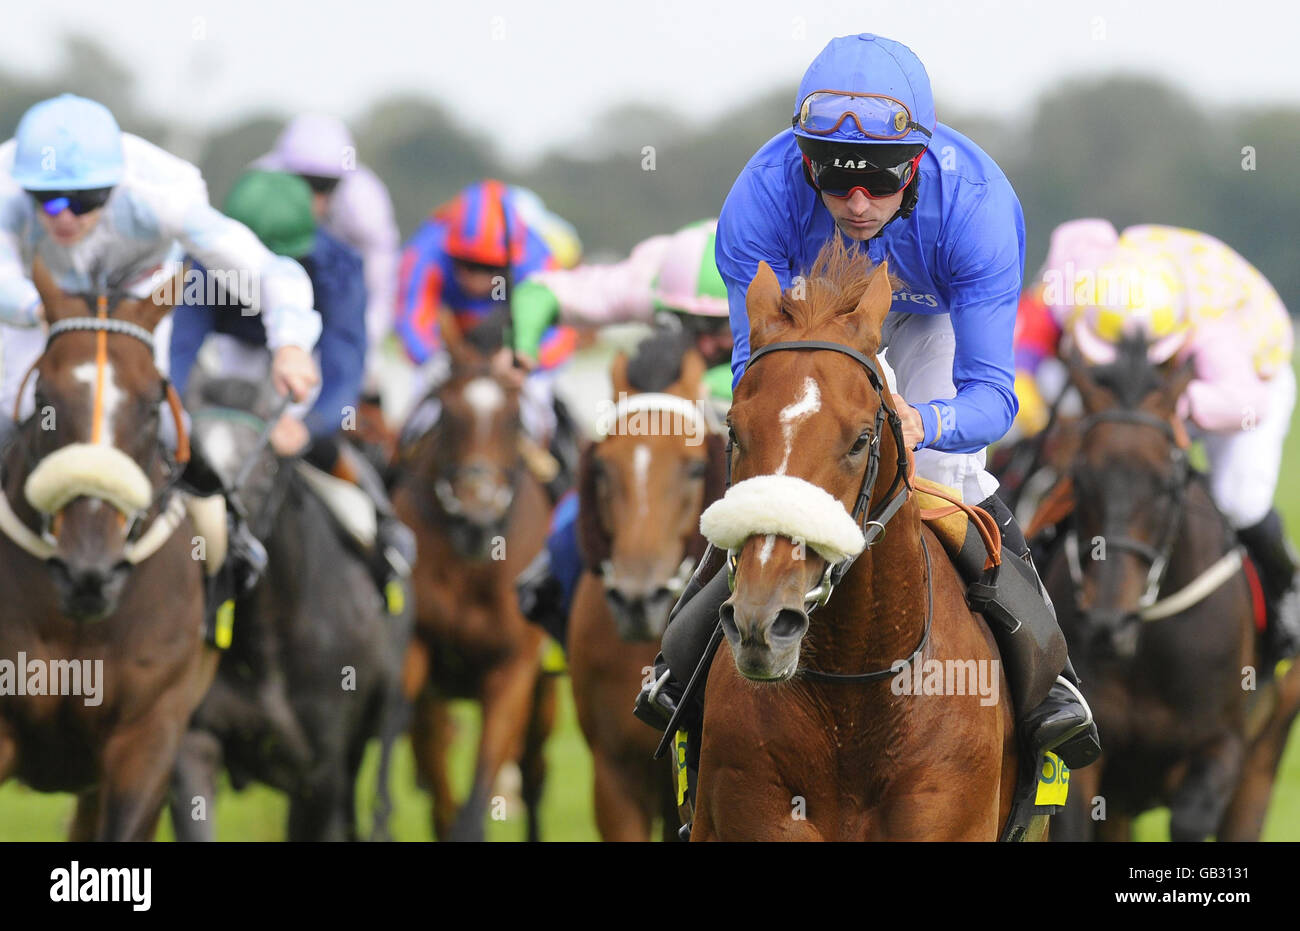 Horse Racing - Newbury. All The Good and Dane O'Neill (right, blue) win The totesport Newburgh Stakes at Newbury Racecourse. Stock Photo